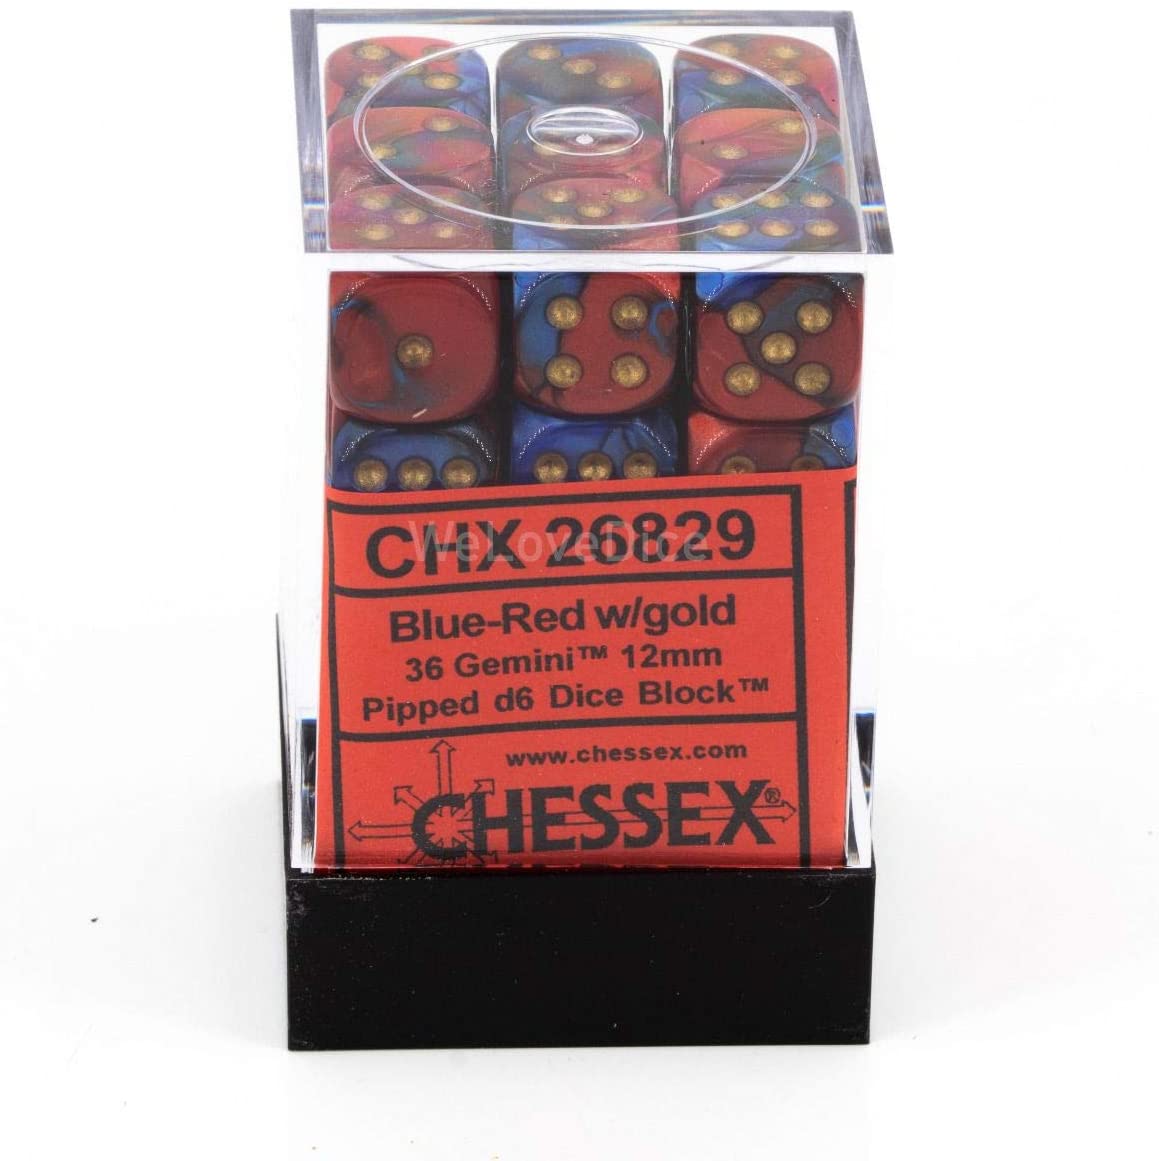 Chessex Dice: D6 Block 12mm - Gemini - Blue-Red with Gold (CHX 26829) - Gamescape